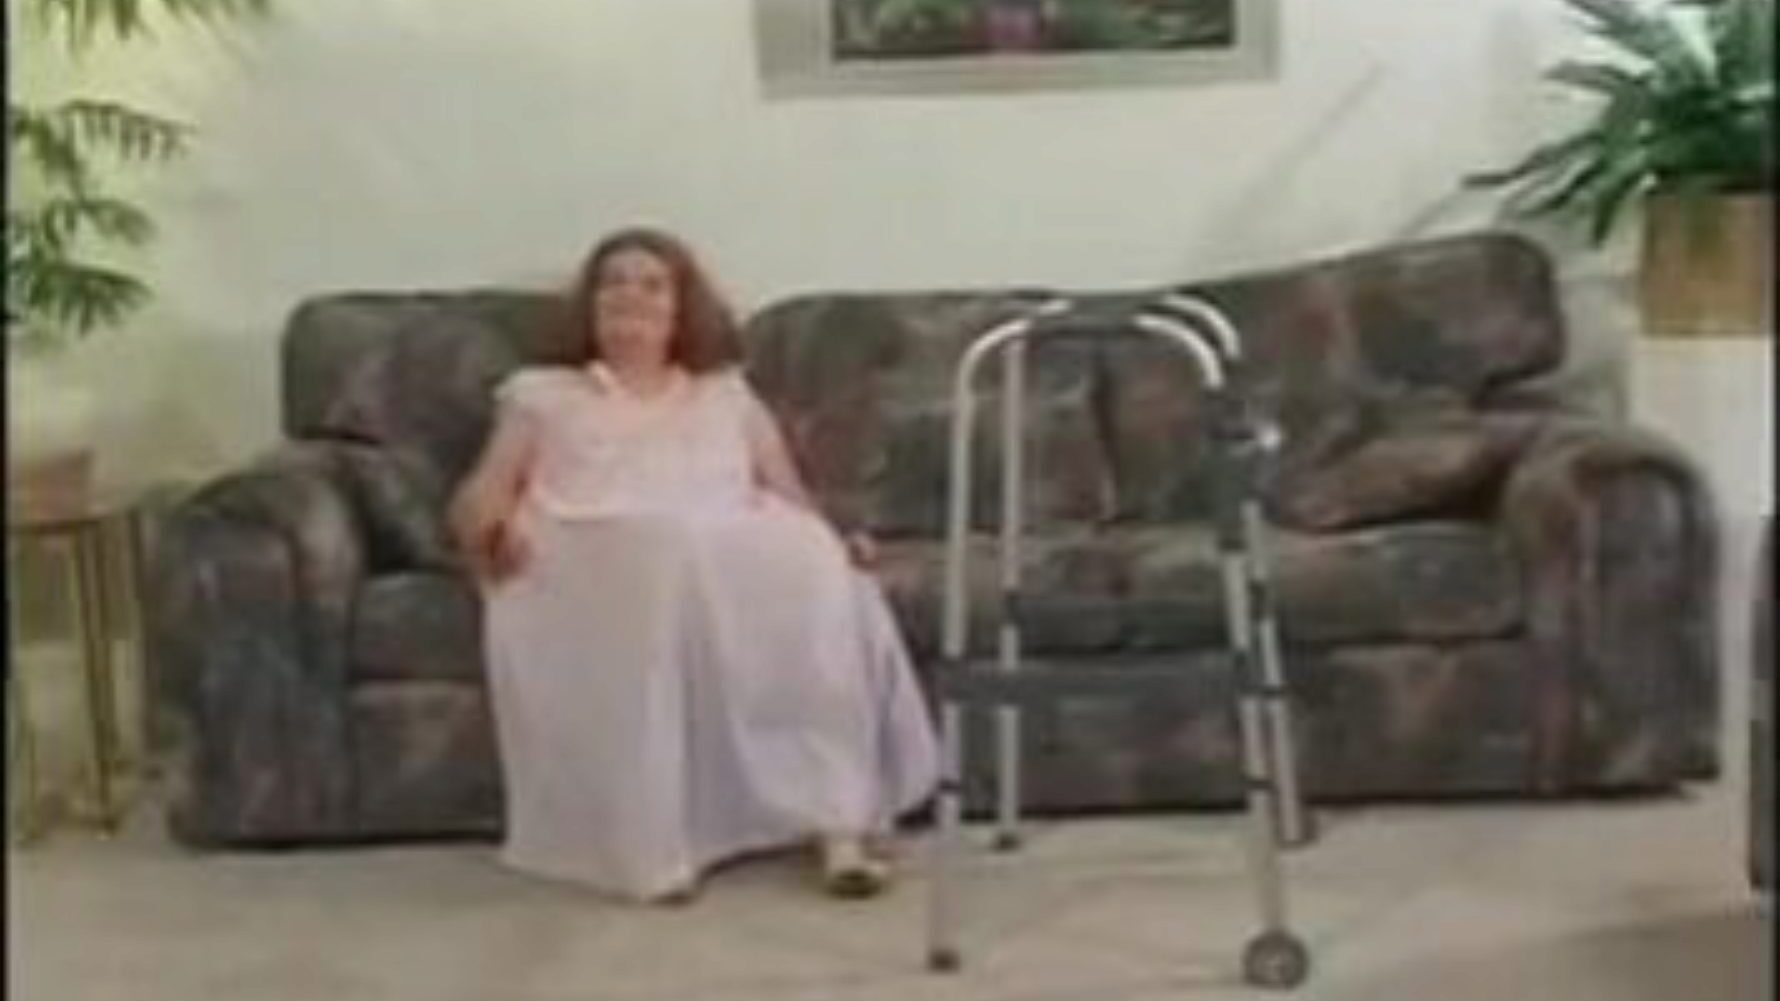 Granny Davina Hardman, Free Youtube Granny Porn Movie c8 See Granny Davina Hardman clip on xHamster, the most outstanding sex tube web page with tons of free Youtube Granny & Redtube Granny porn clips